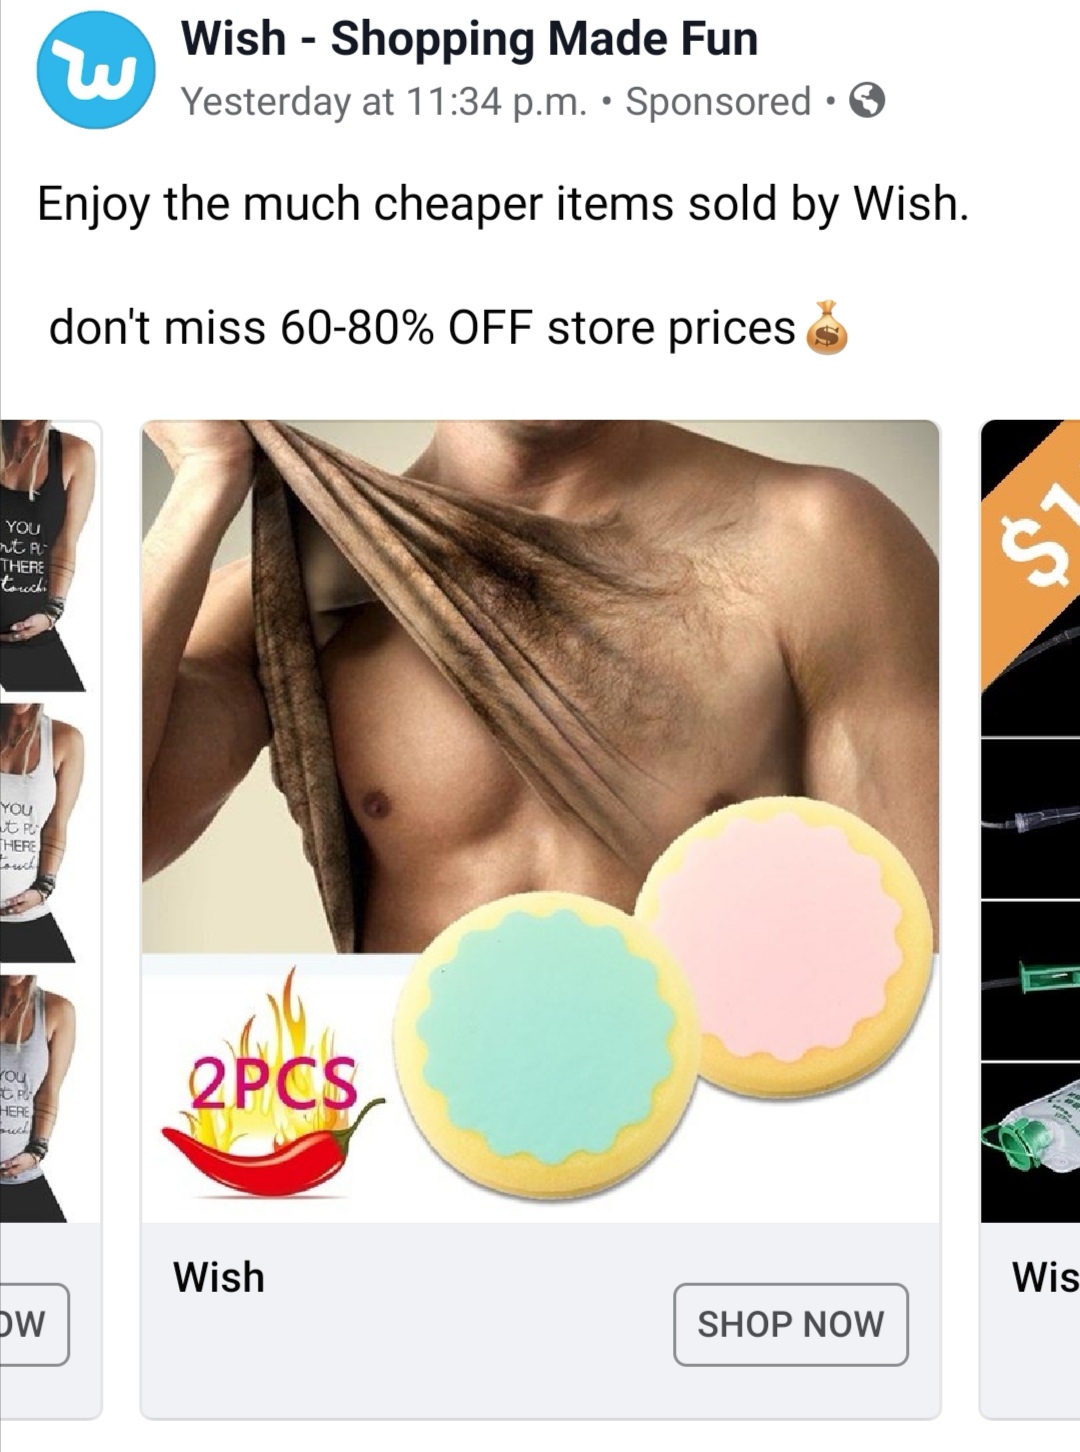 neck - Wish Shopping Made Fun Yesterday at p.m. Sponsored Enjoy the much cheaper items sold by Wish. don't miss 6080% Off store prices & You nt Po There touchi You Itu There touch rou Pg Here Buch Pc Wish Wis Dw Shop Now